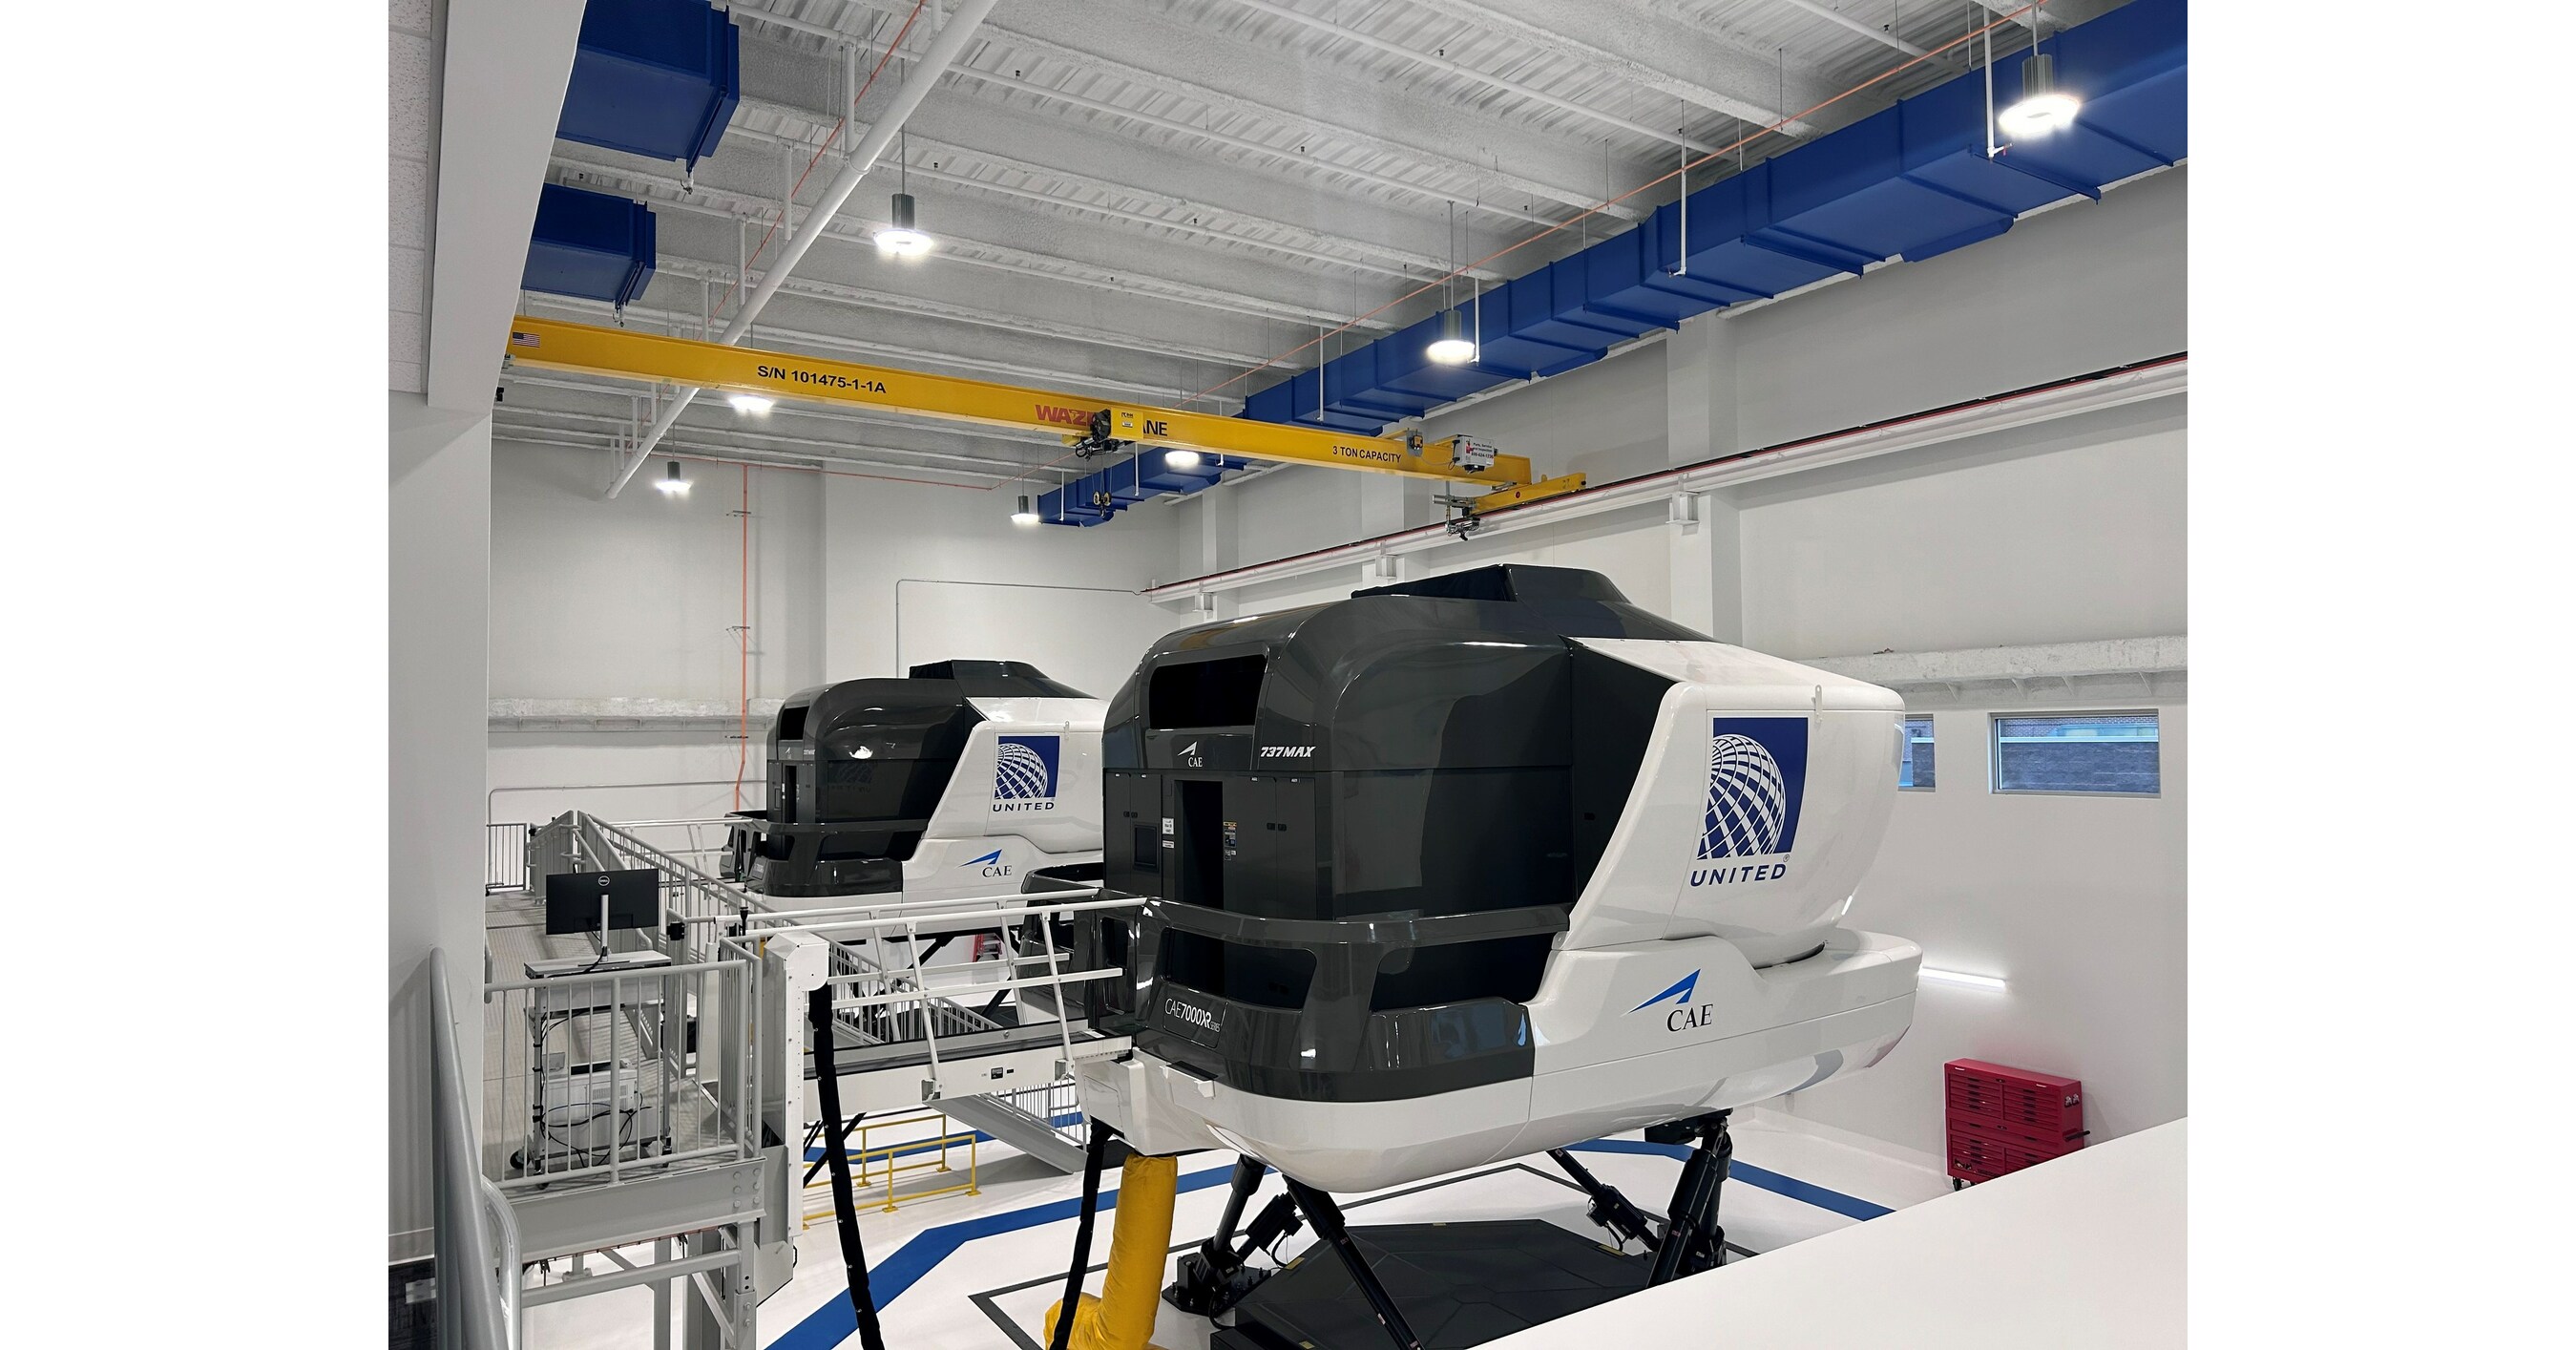 United Expands World's Largest Flight Training Center with Huge